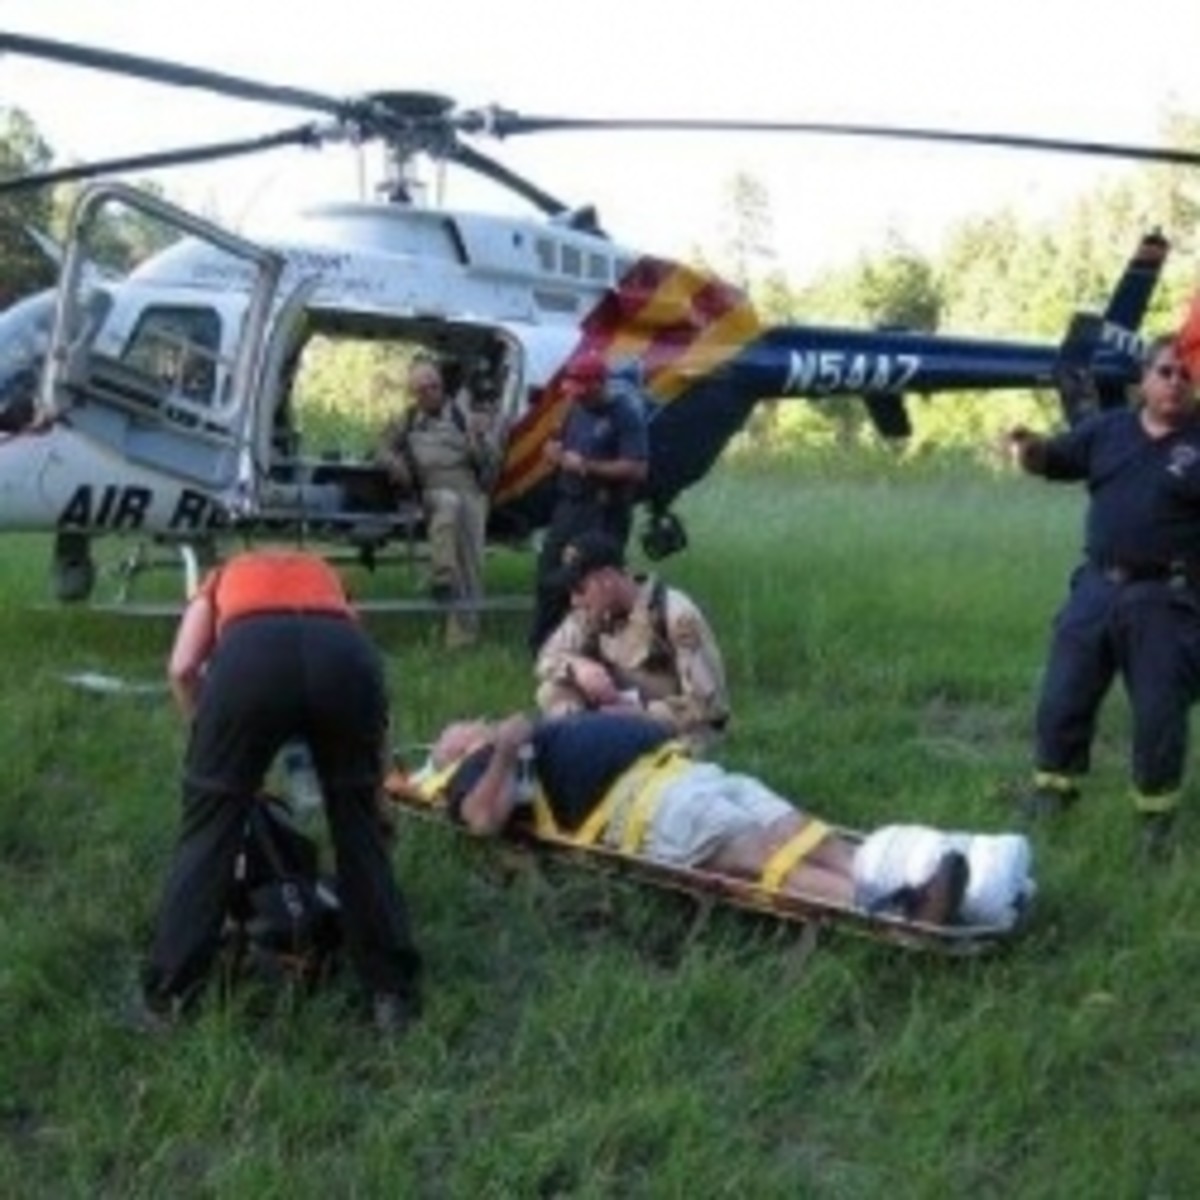 The rescue of an injured hiker 